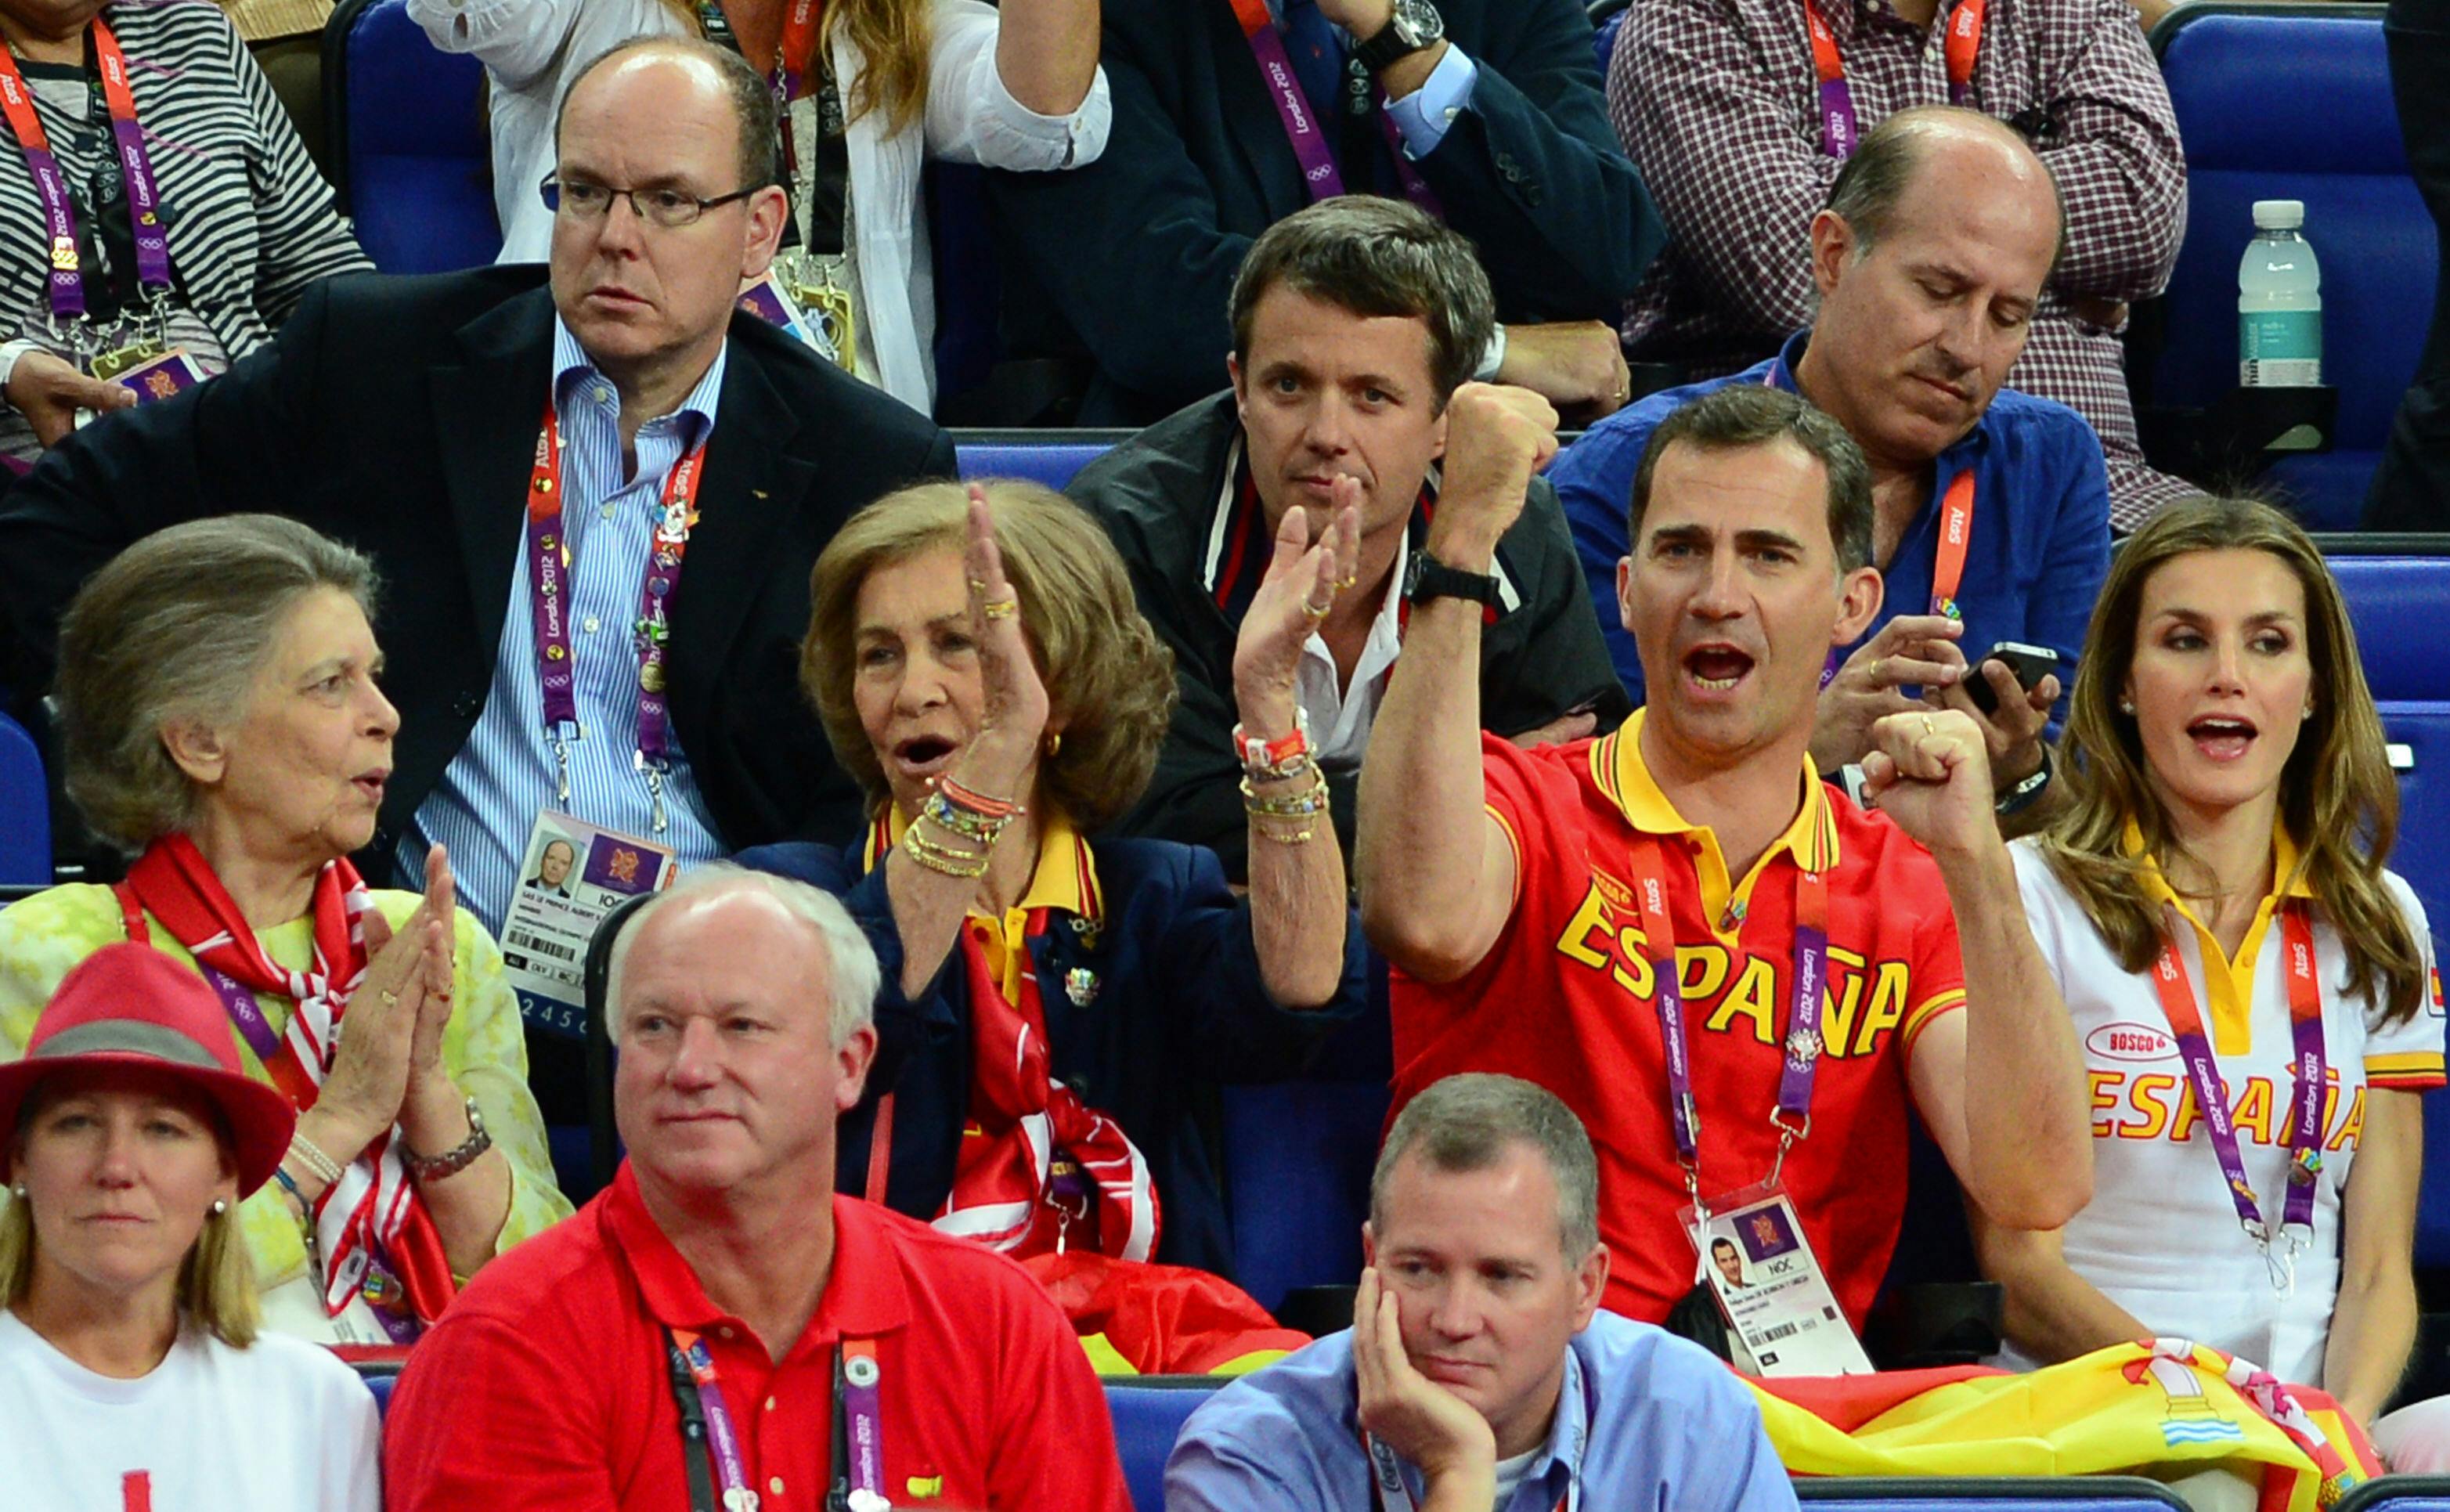 Prince Albert of Monaco (topL), Danish Crown Prince Frederik (topC), Spain's Queen Sofia (C), Spain's Prince Felipe (2R) and Princess Letizia watch the London 2012 Olympic Games men's gold medal basketball game between USA and Spain at the North Greenwich Arena in London on August 12, 2012. AFP PHOTO / MARTIN BUREAU